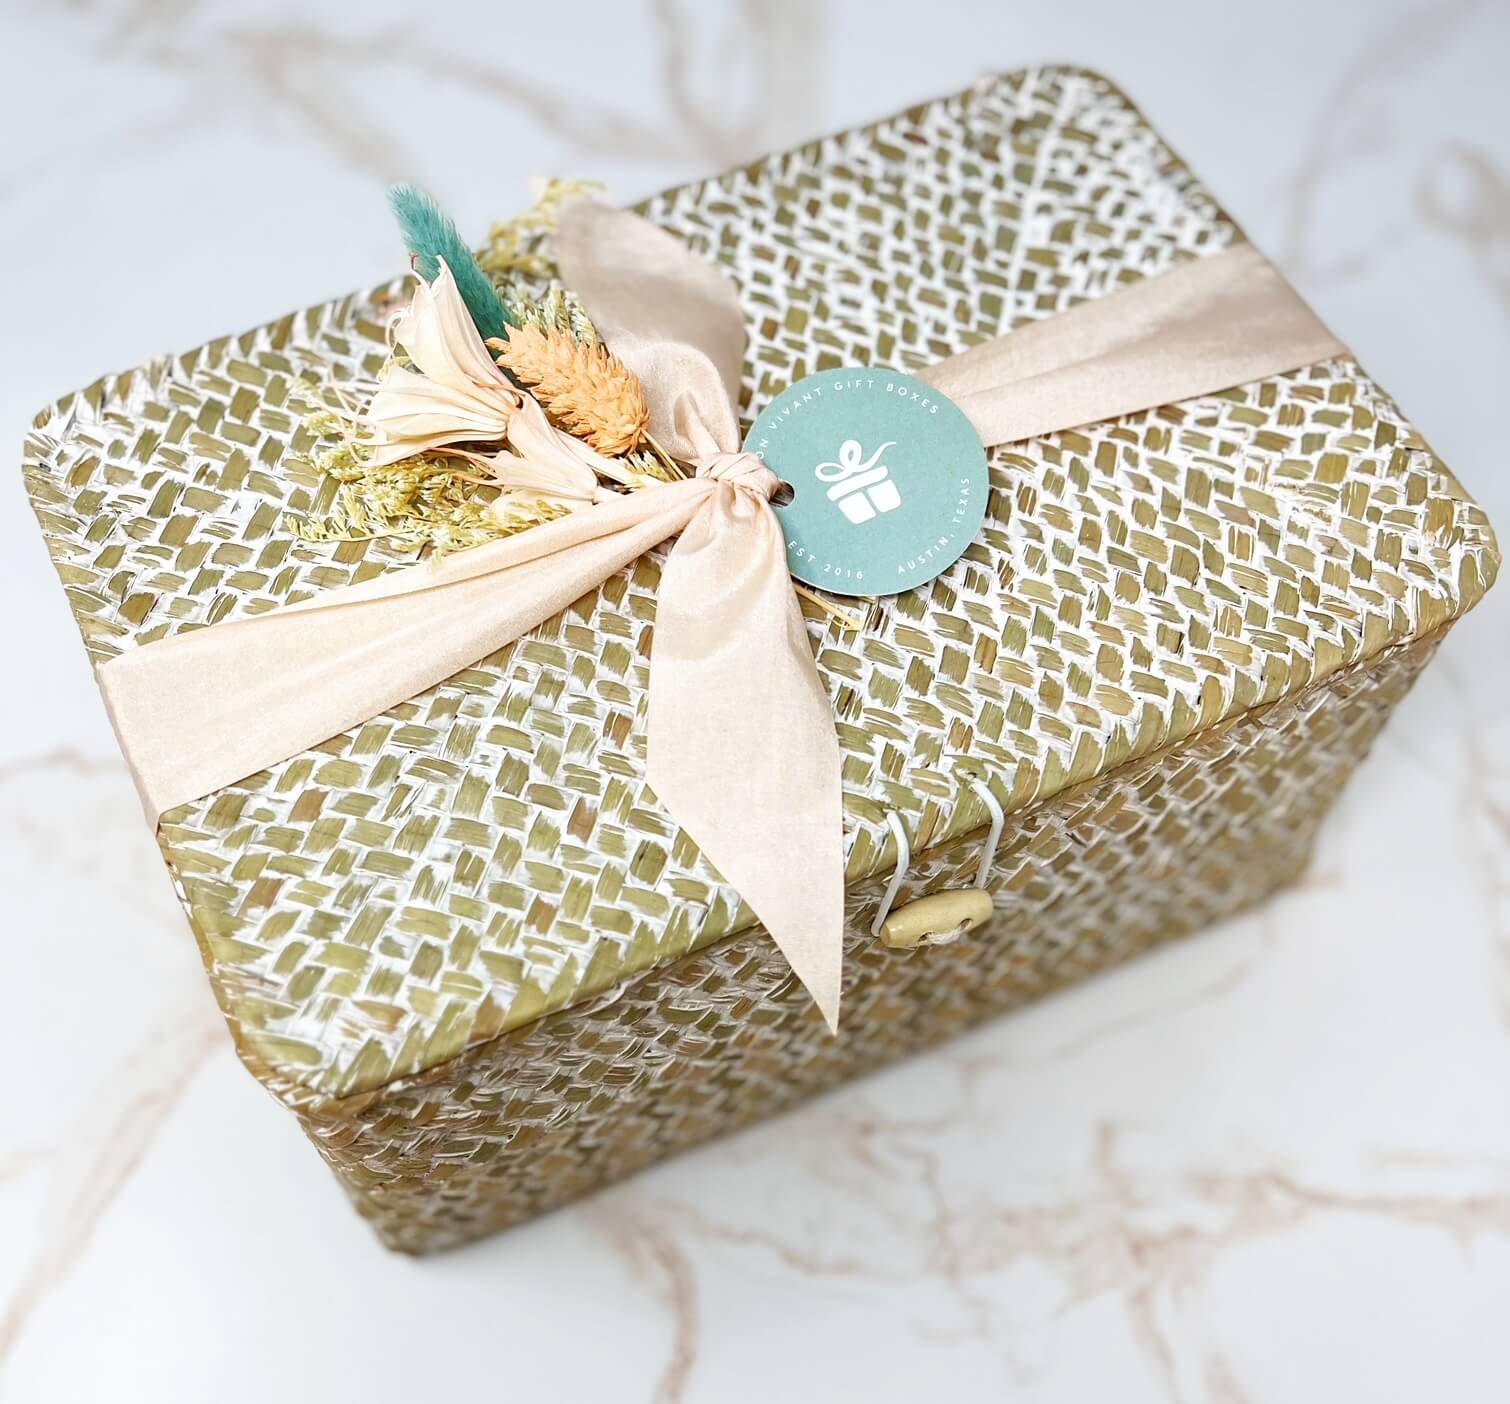 woven gift basket with hinged lid